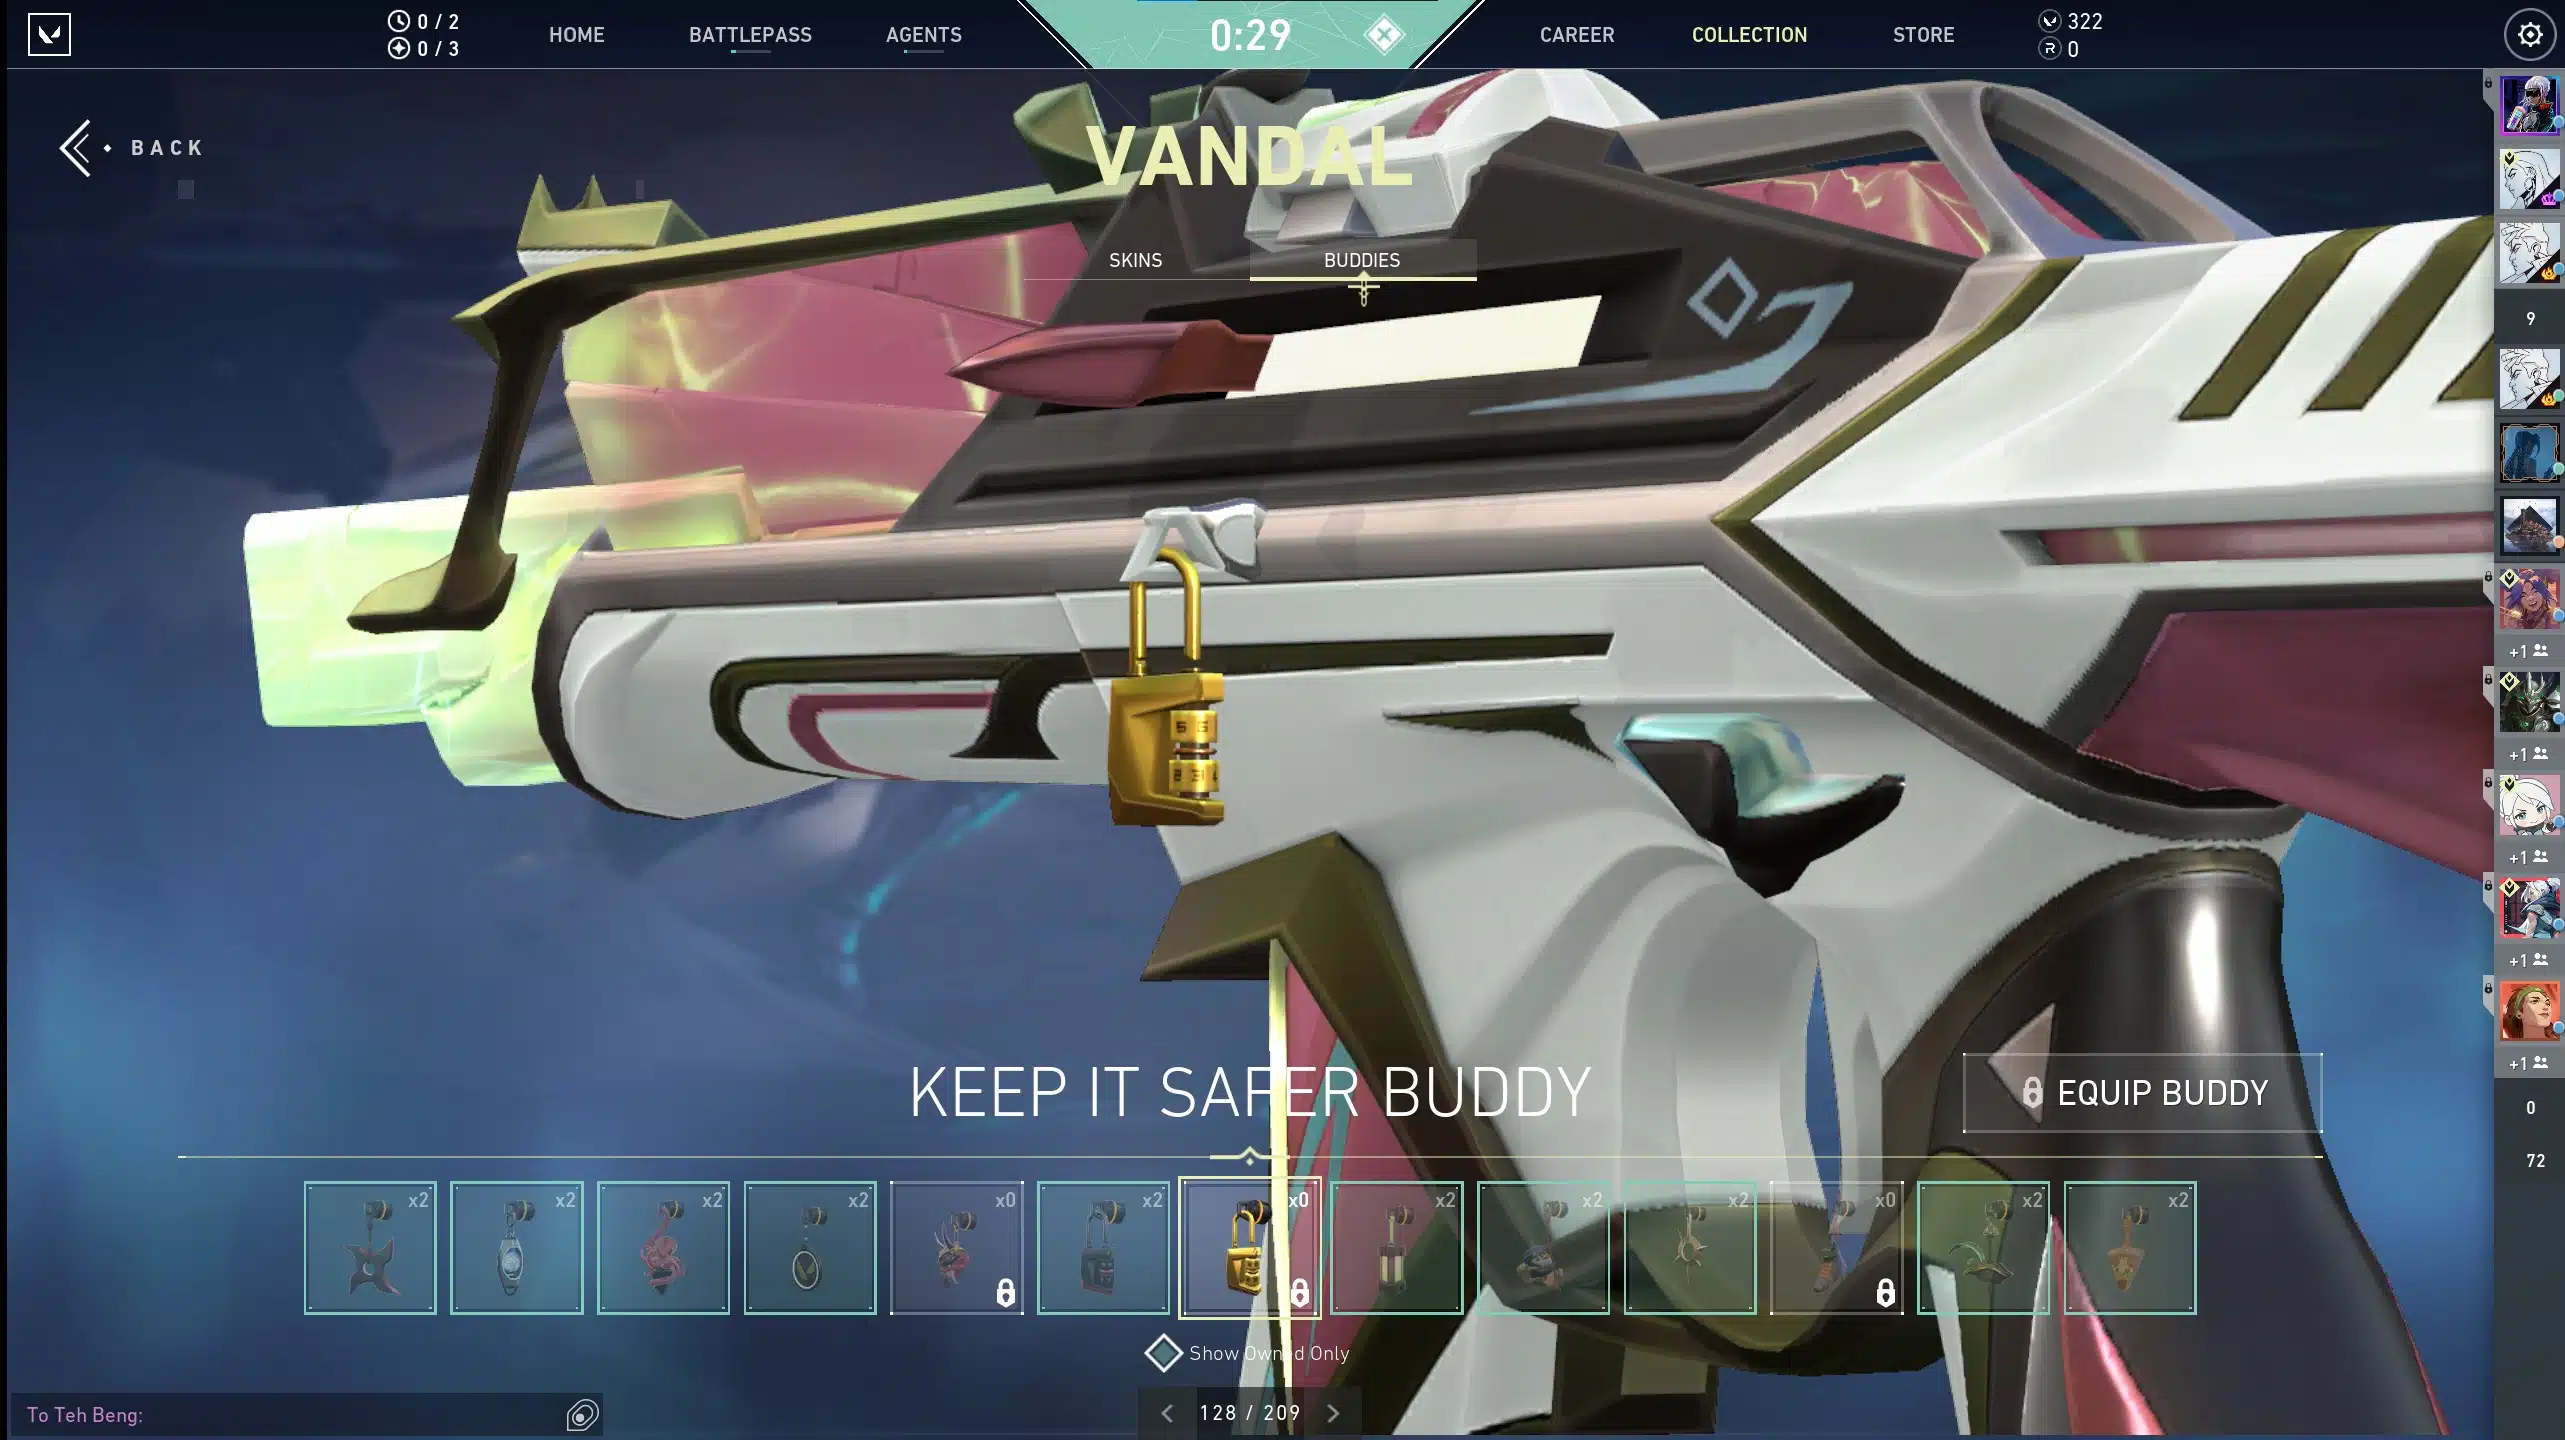 How To Claim ‘Keep It Safer’ Gun Buddy In Valorant